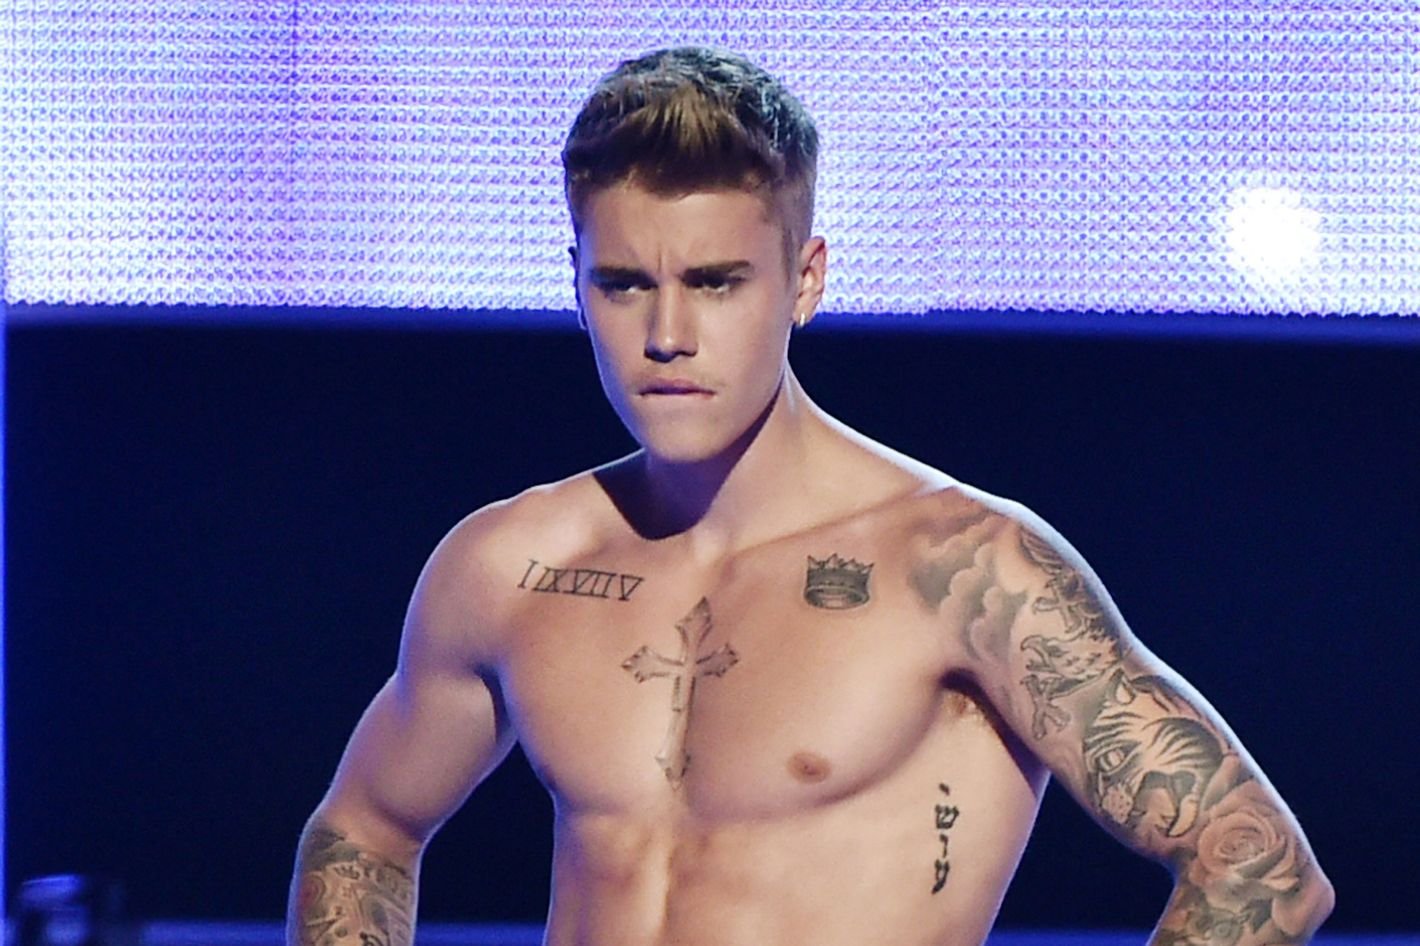 Justin Bieber Naked Beach Videos - Oh Dear, Now Justin Bieber Is Fully Naked While on Vacation